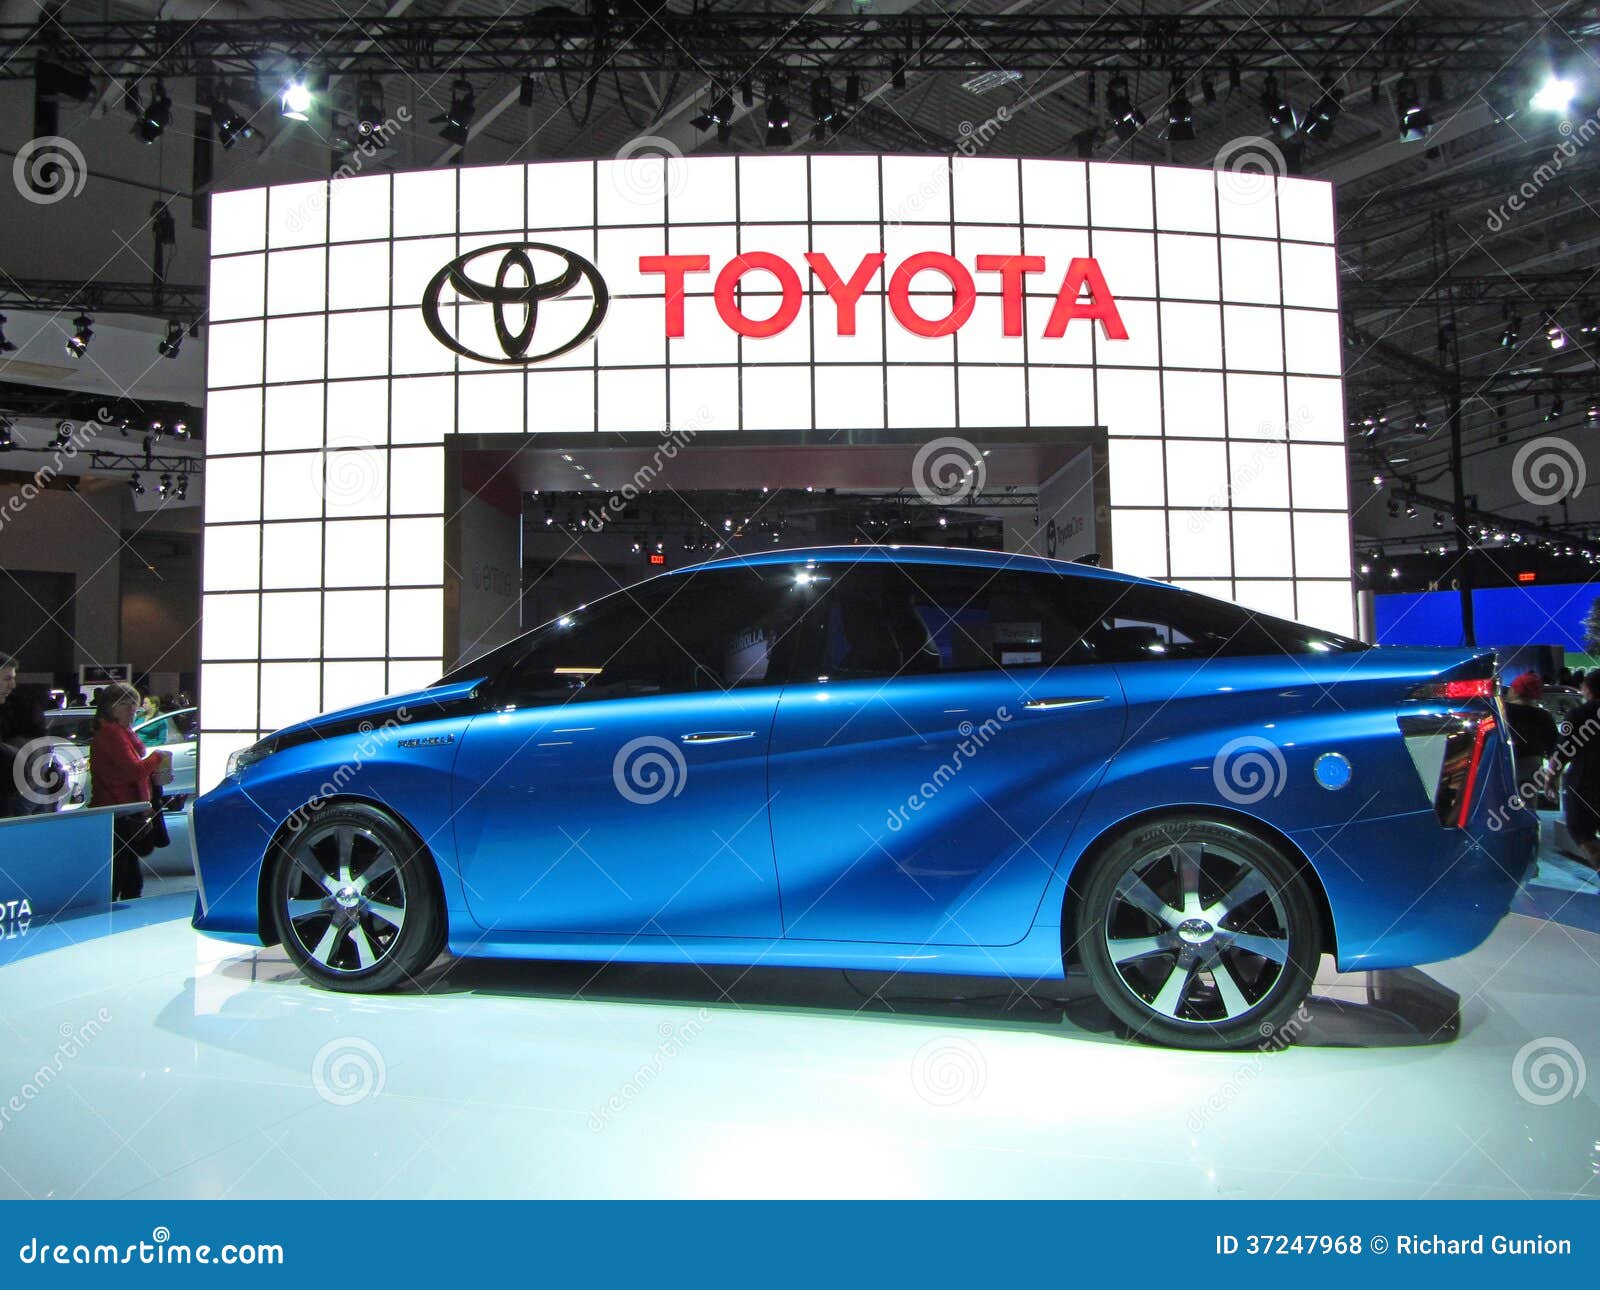 toyota fuel cell auto #6